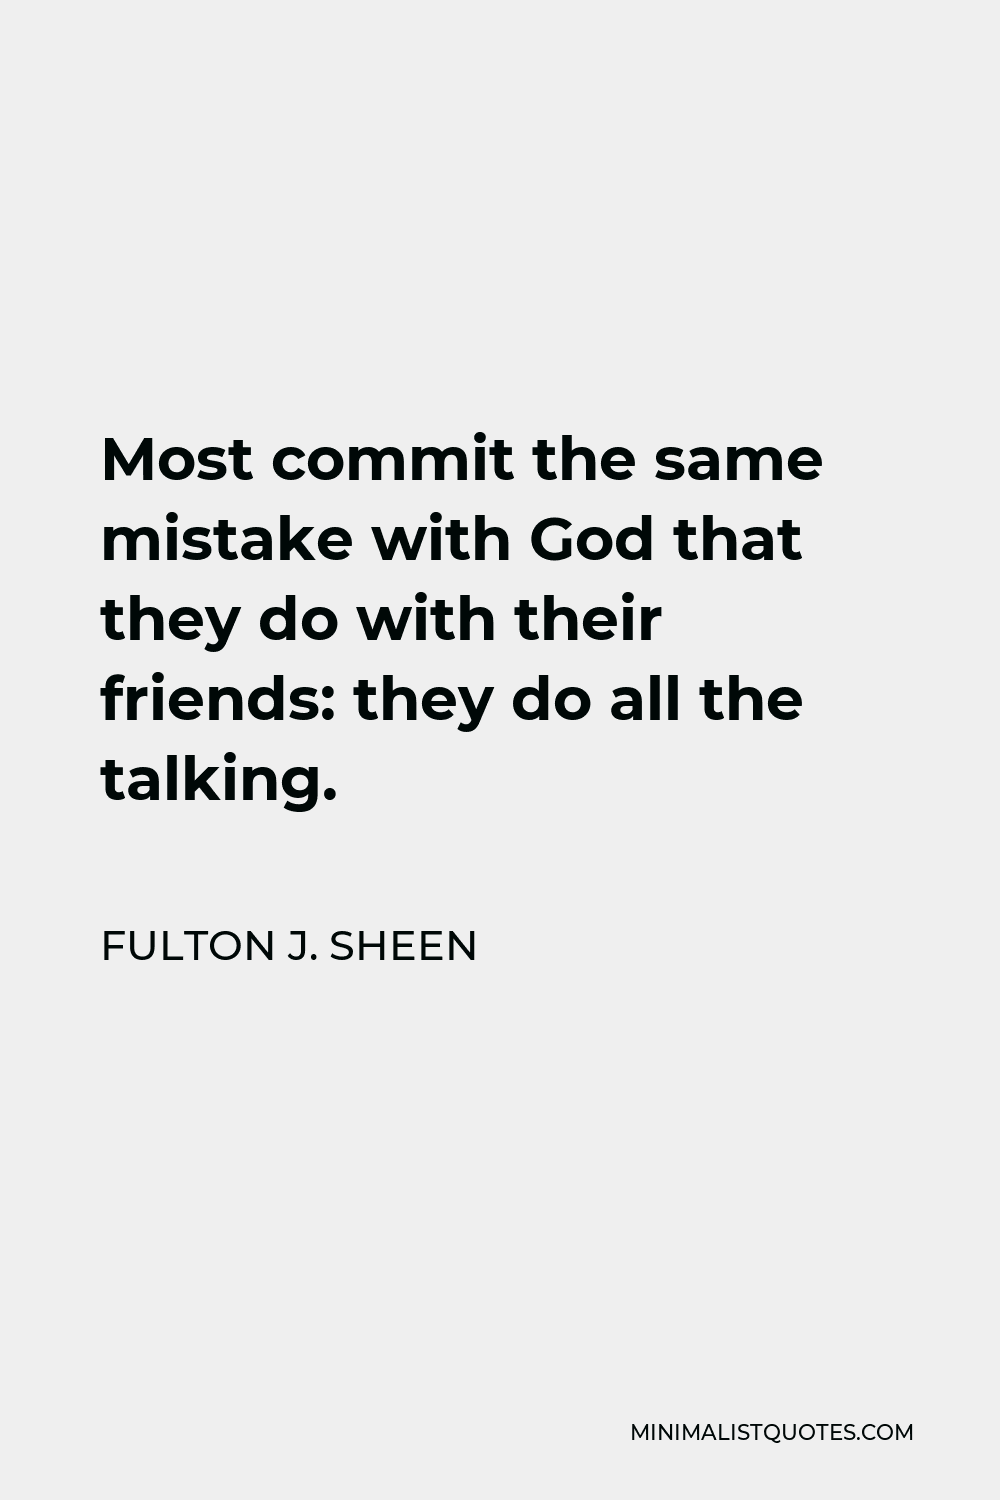 Fulton J. Sheen Quote - Most commit the same mistake with God that they do with their friends: they do all the talking.